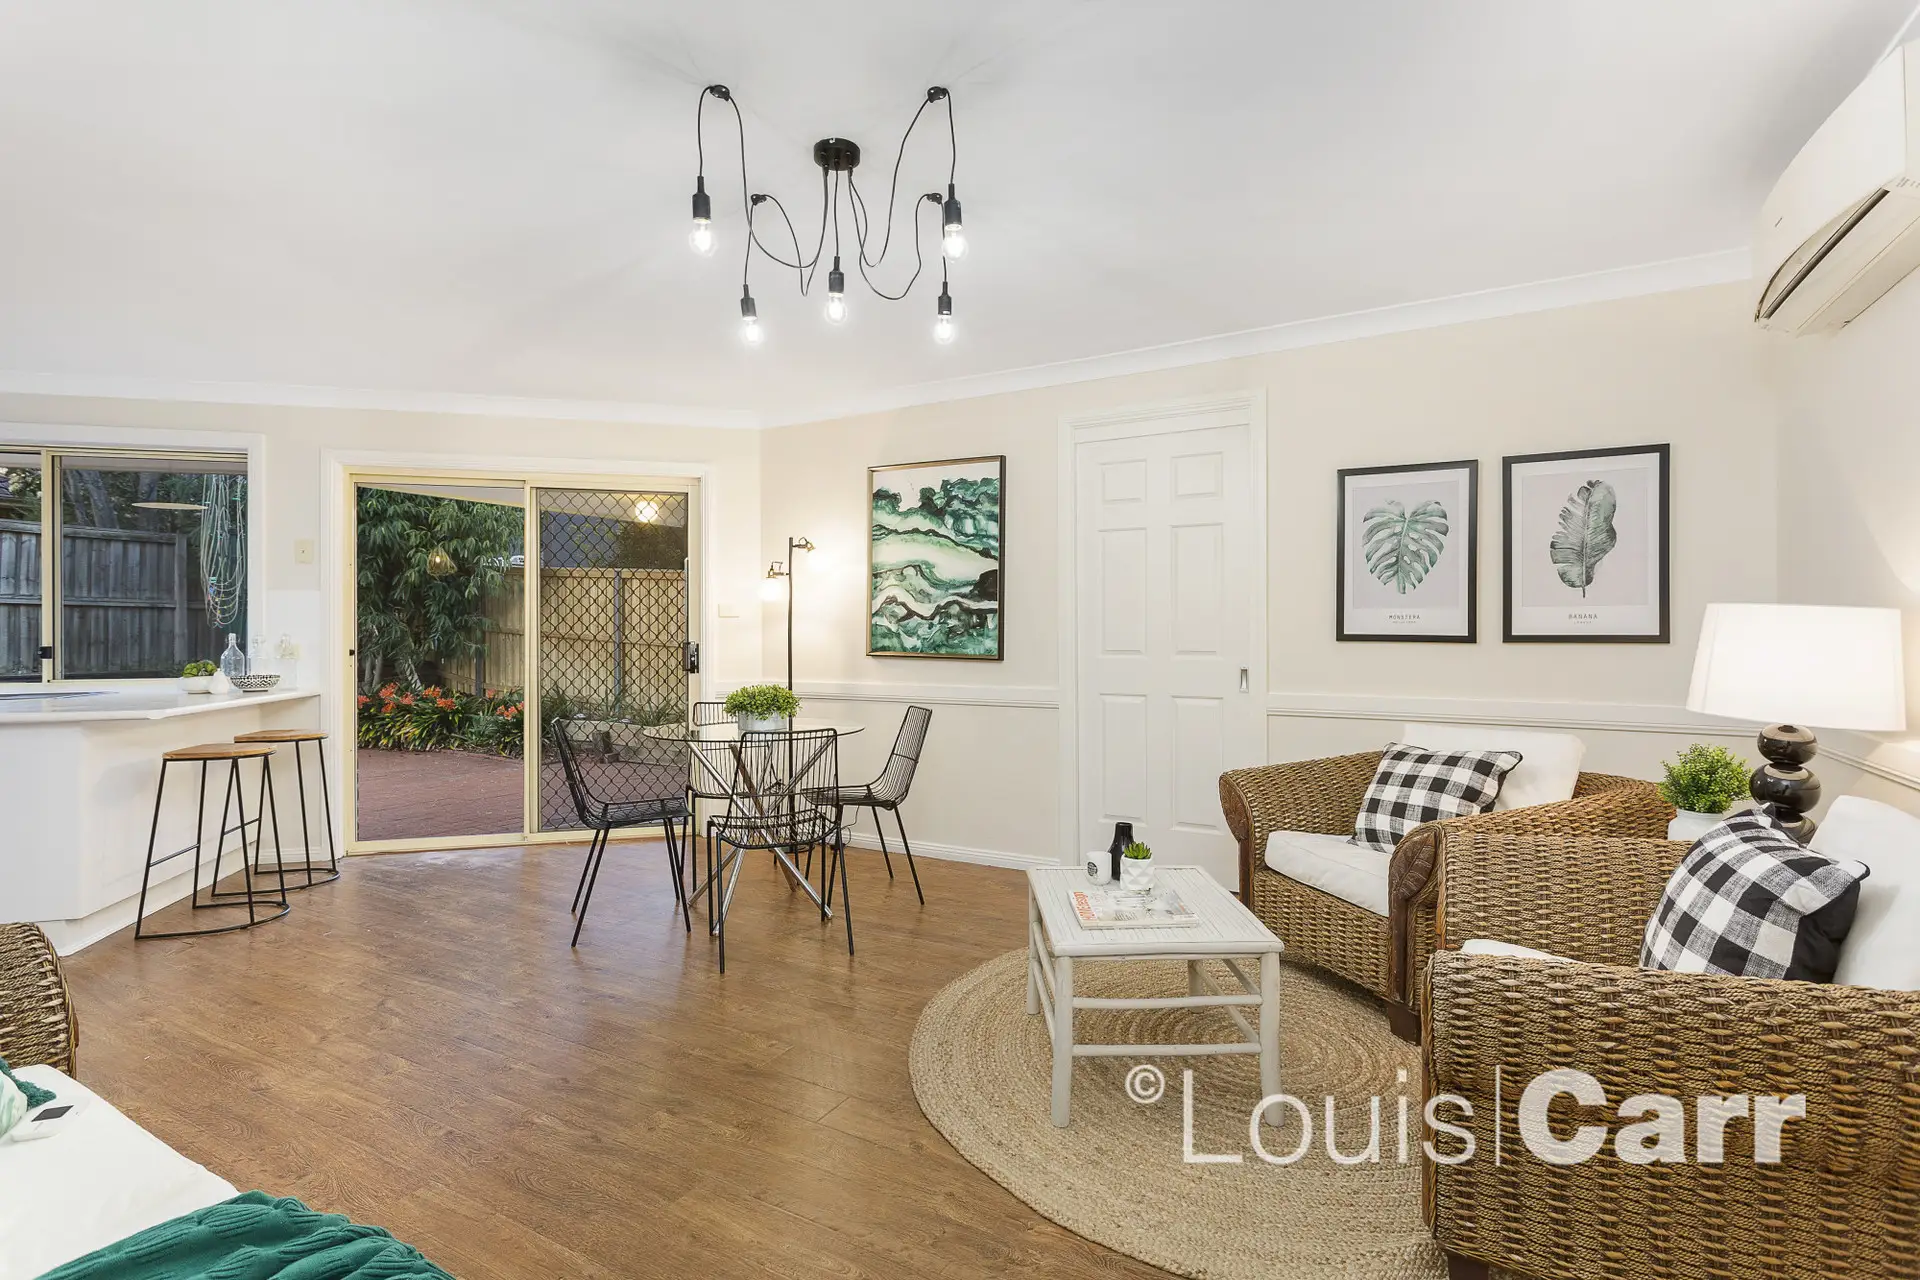 Photo #4: 2/5 Merelynne Avenue, West Pennant Hills - Sold by Louis Carr Real Estate